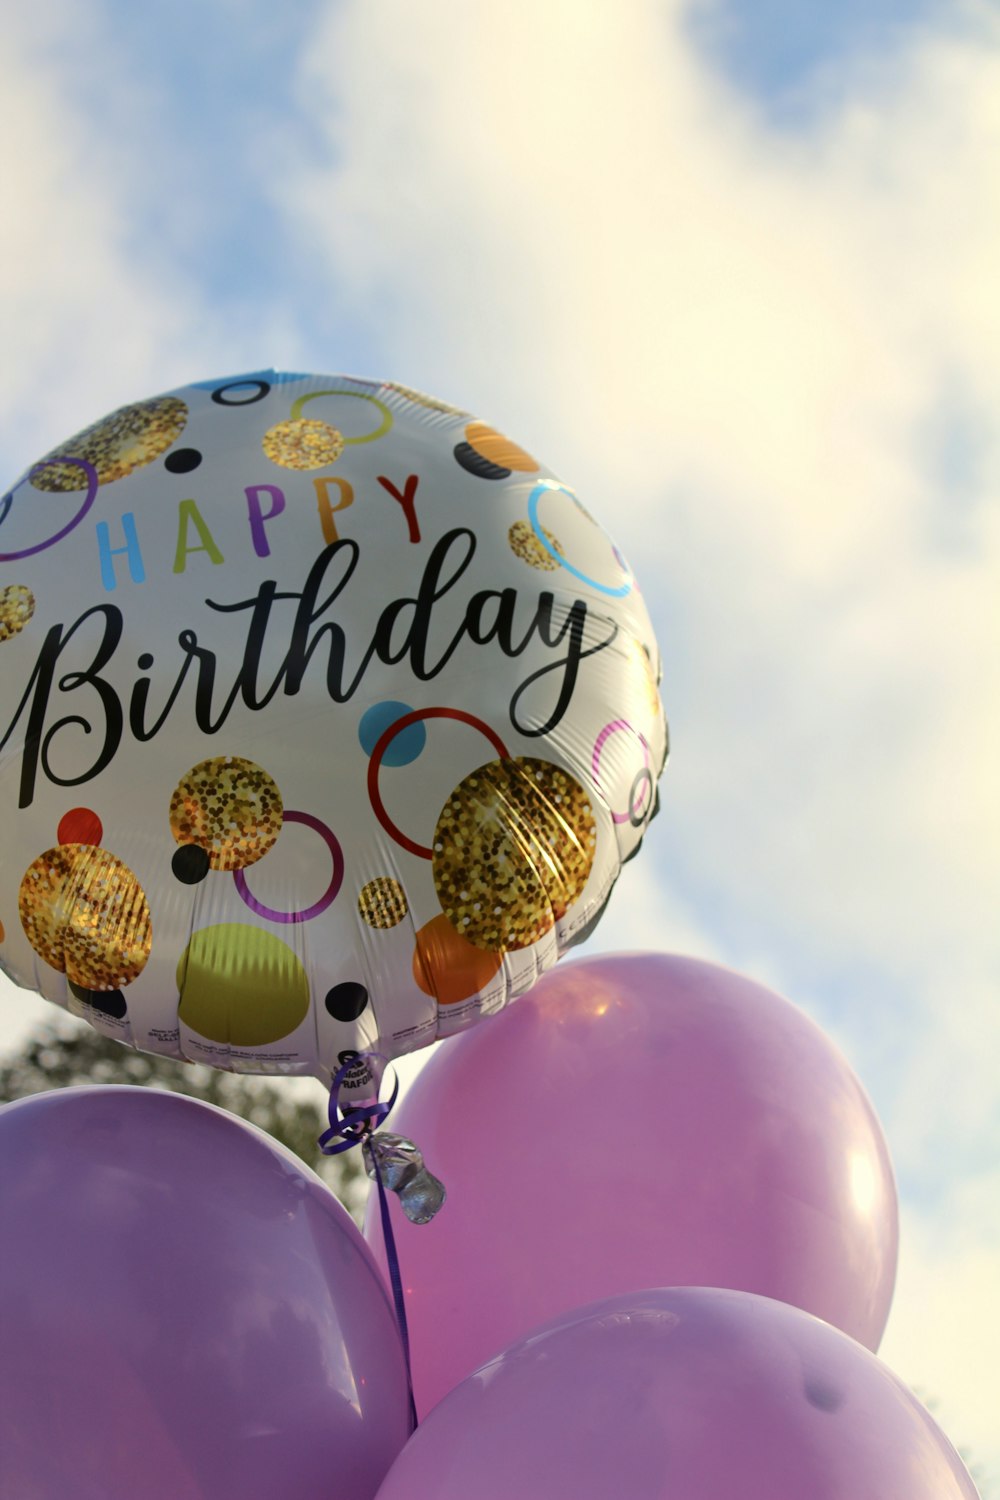 Collection of over 999+ stunning 4K birthday balloon images